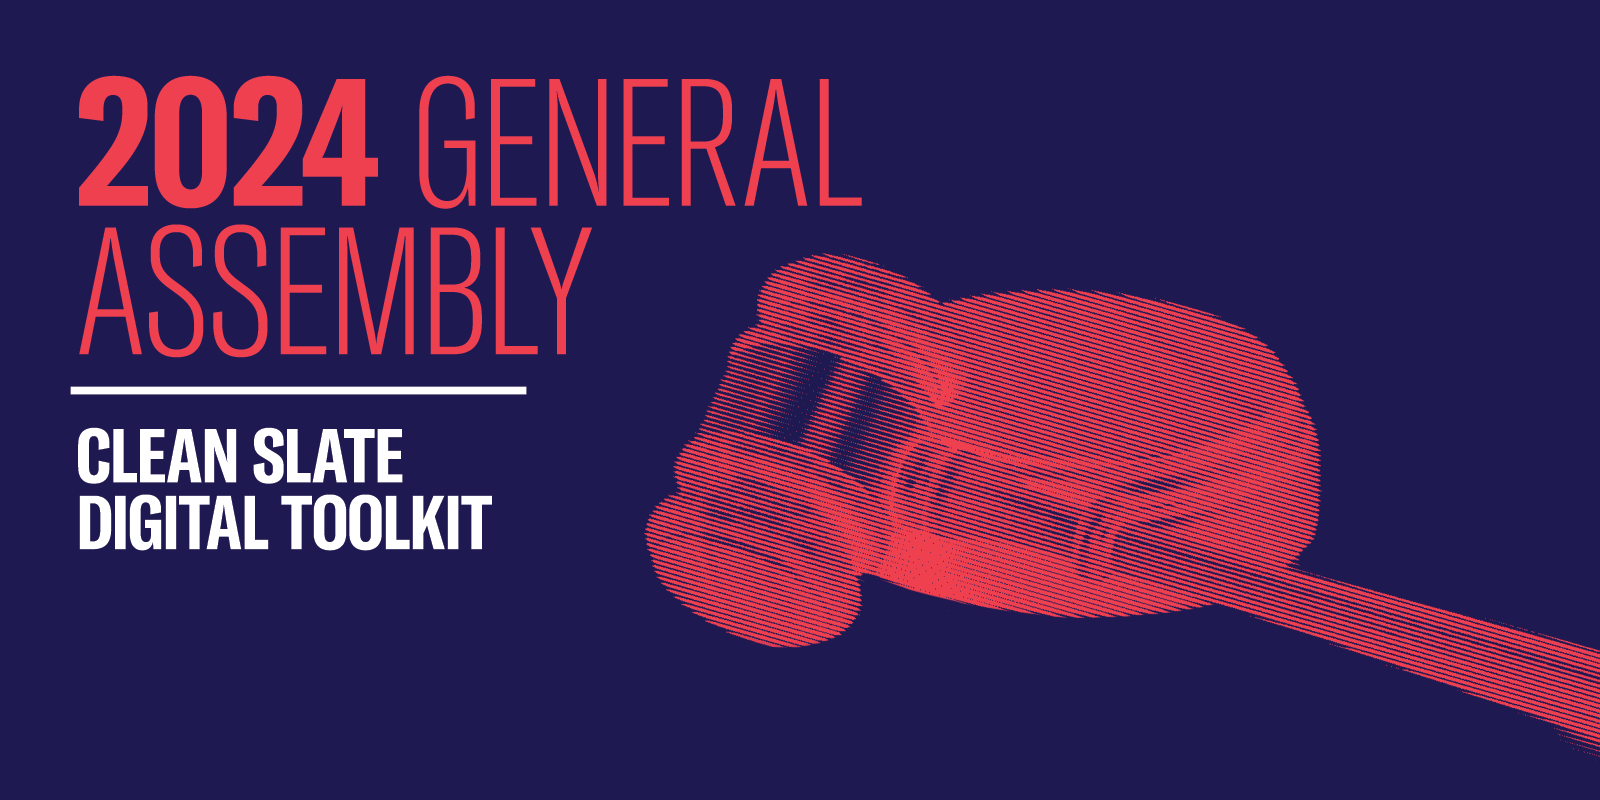 2024 General Assembly Clean Slate Digital Toolkit